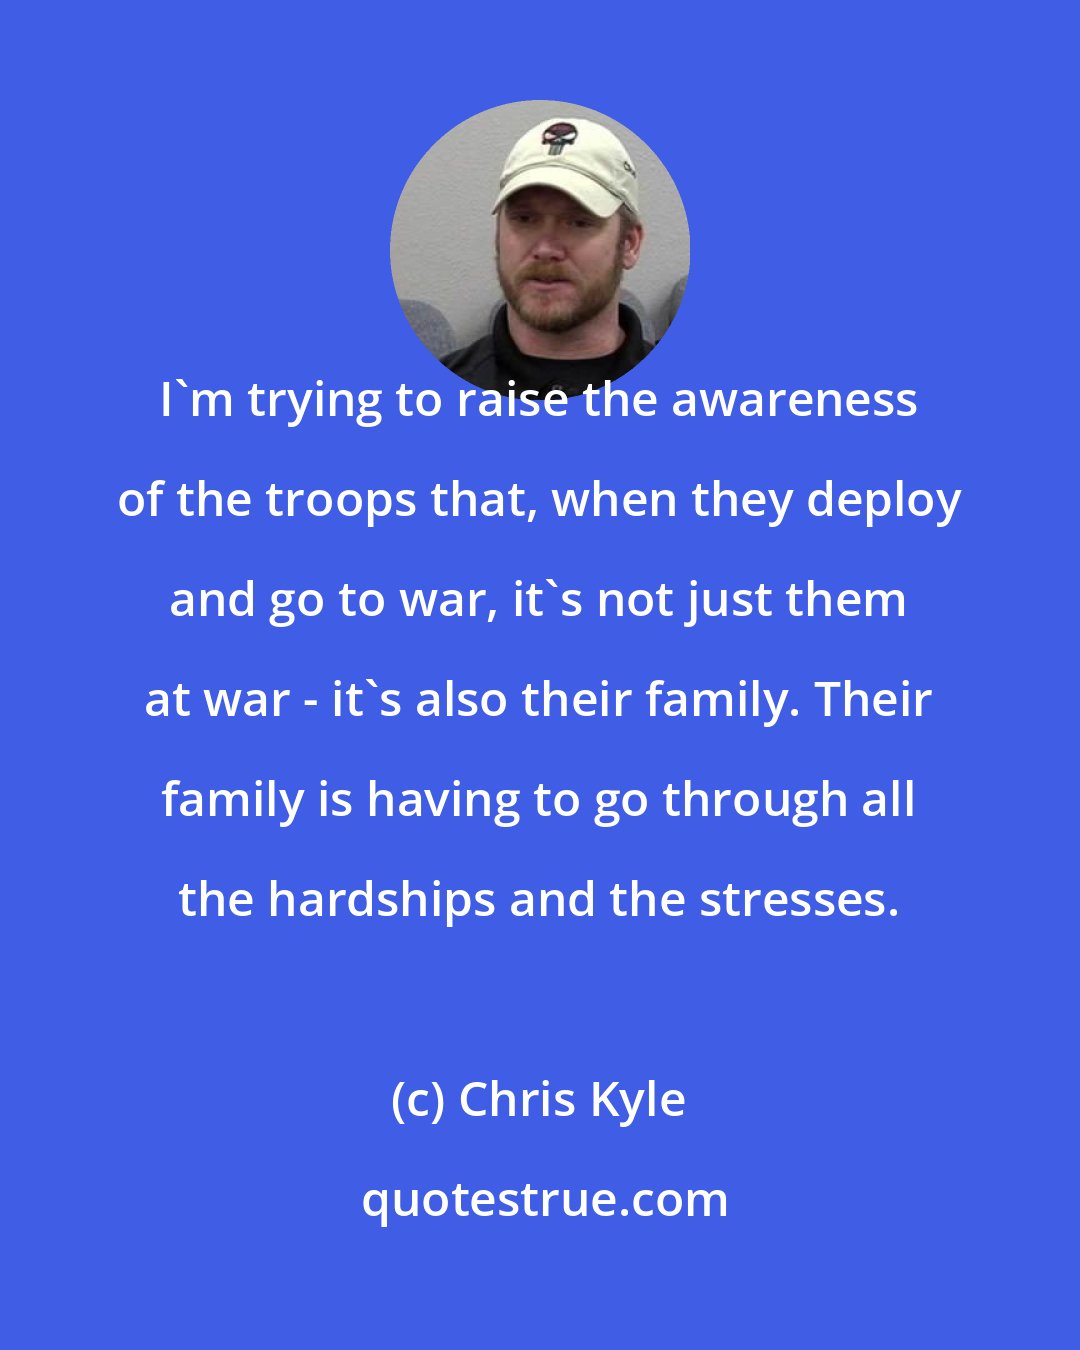 Chris Kyle: I'm trying to raise the awareness of the troops that, when they deploy and go to war, it's not just them at war - it's also their family. Their family is having to go through all the hardships and the stresses.